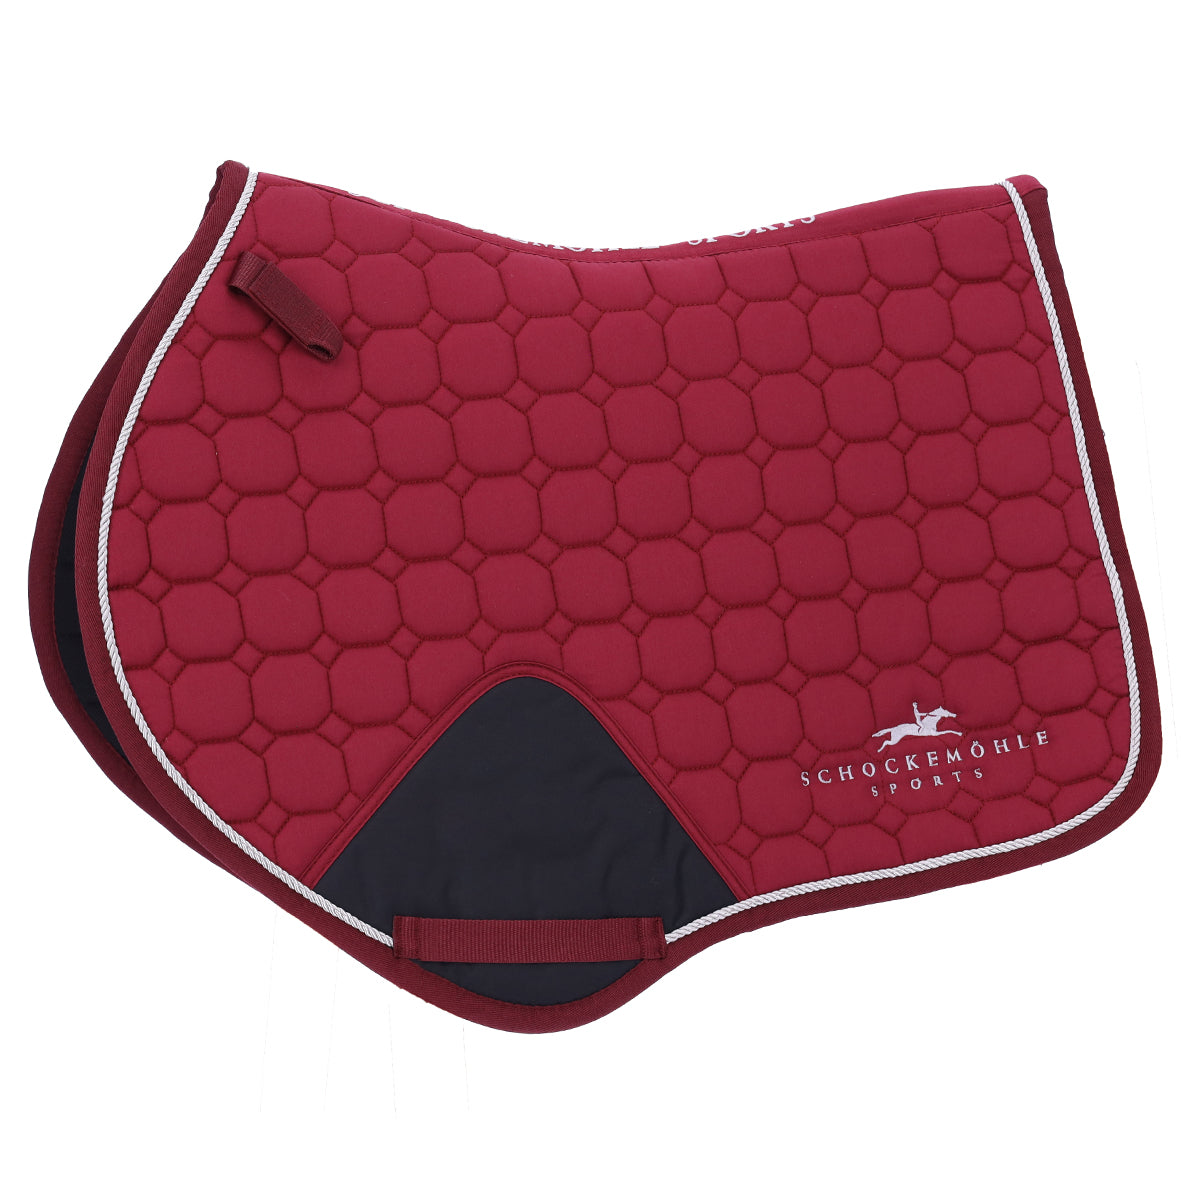 Schockemohle Sports New Power Pad Jumping AW23